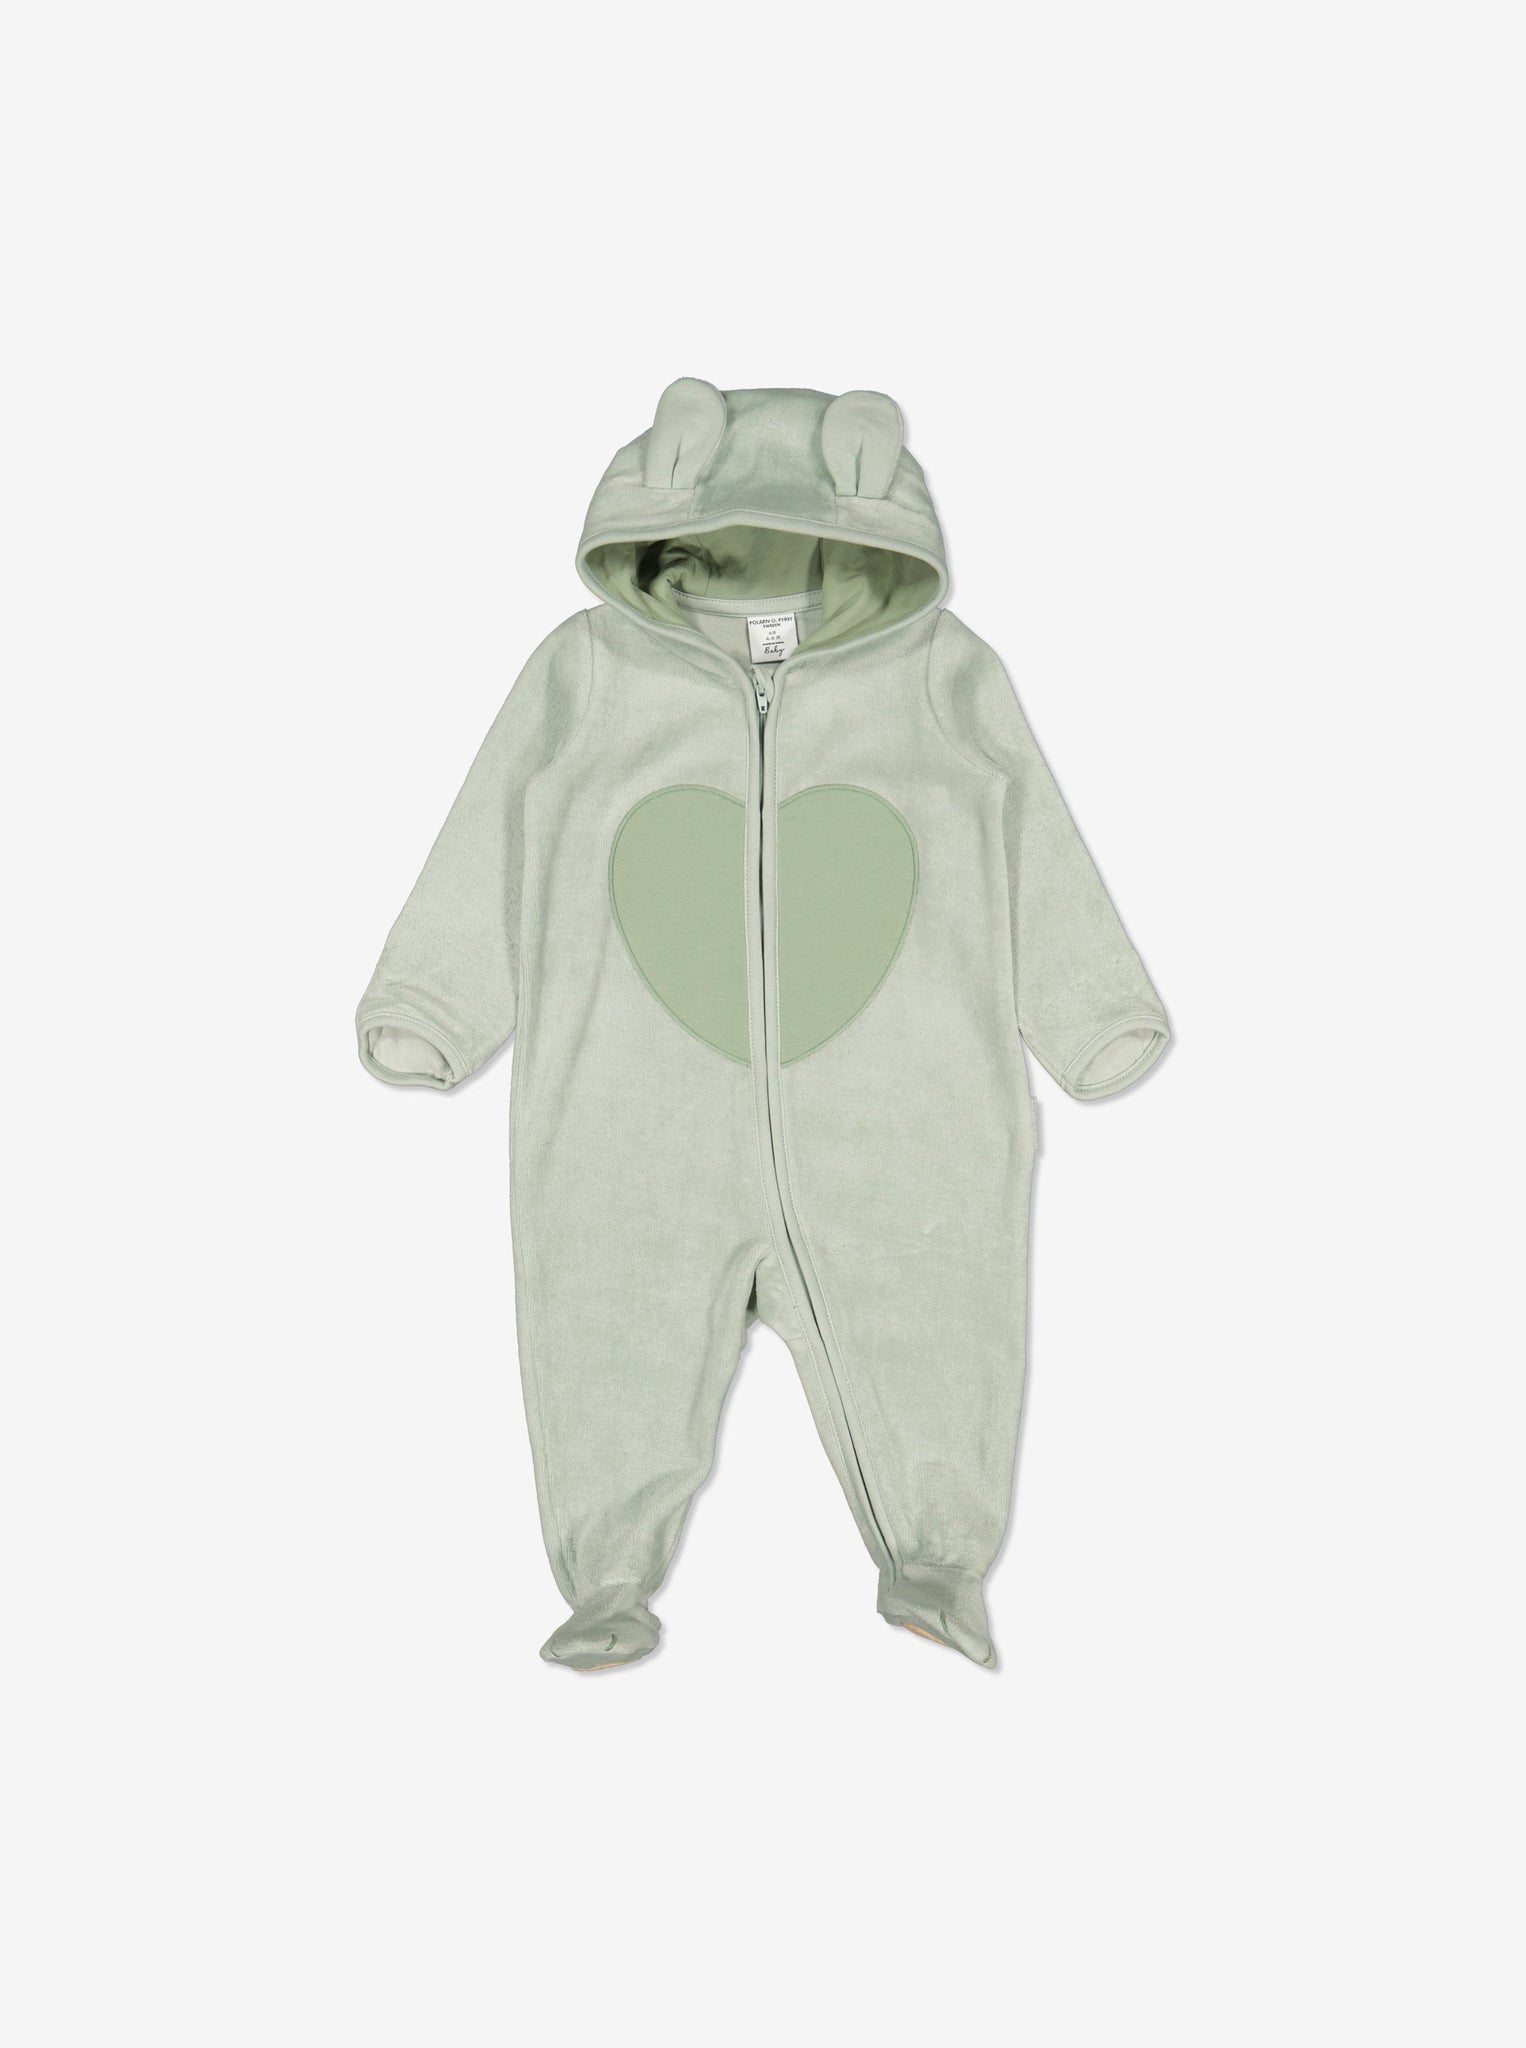  Heart Print Grey Baby All In One from Polarn O. Pyret Kidswear. Made from sustainable materials.